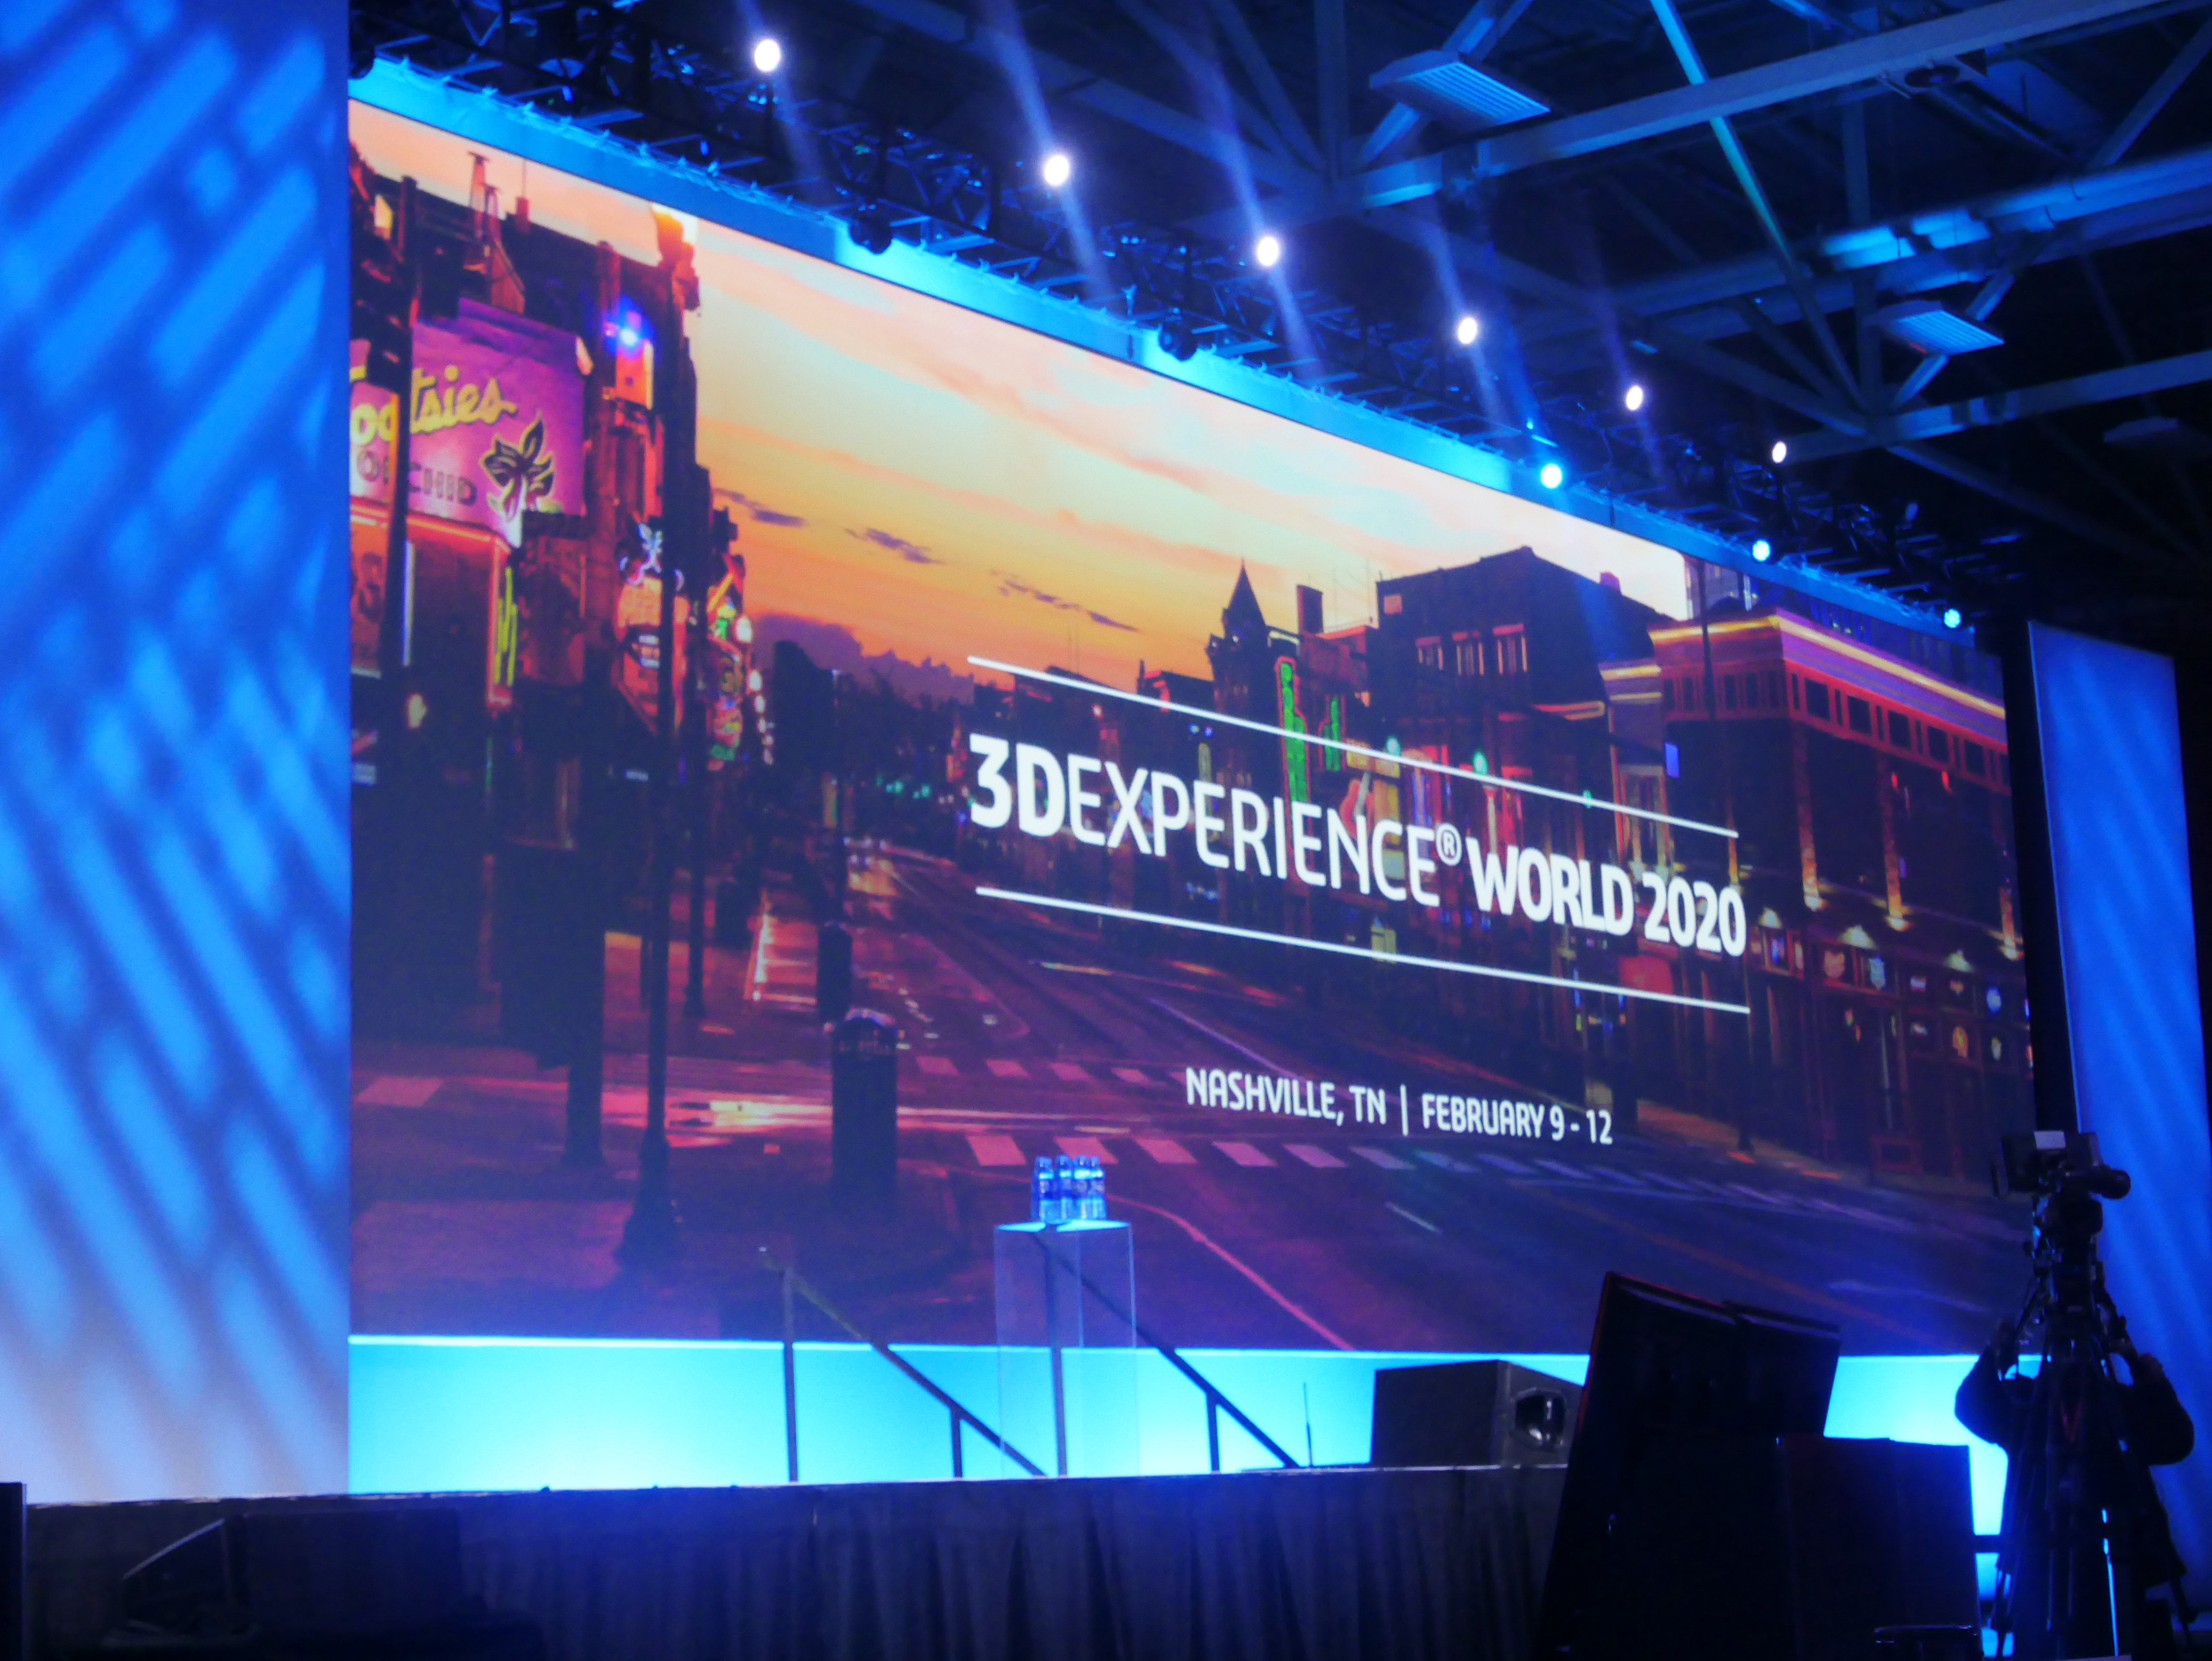 The 3DEXPERIENCE World signage at SOLIDWORKS World. Photo by Tia Vialva.